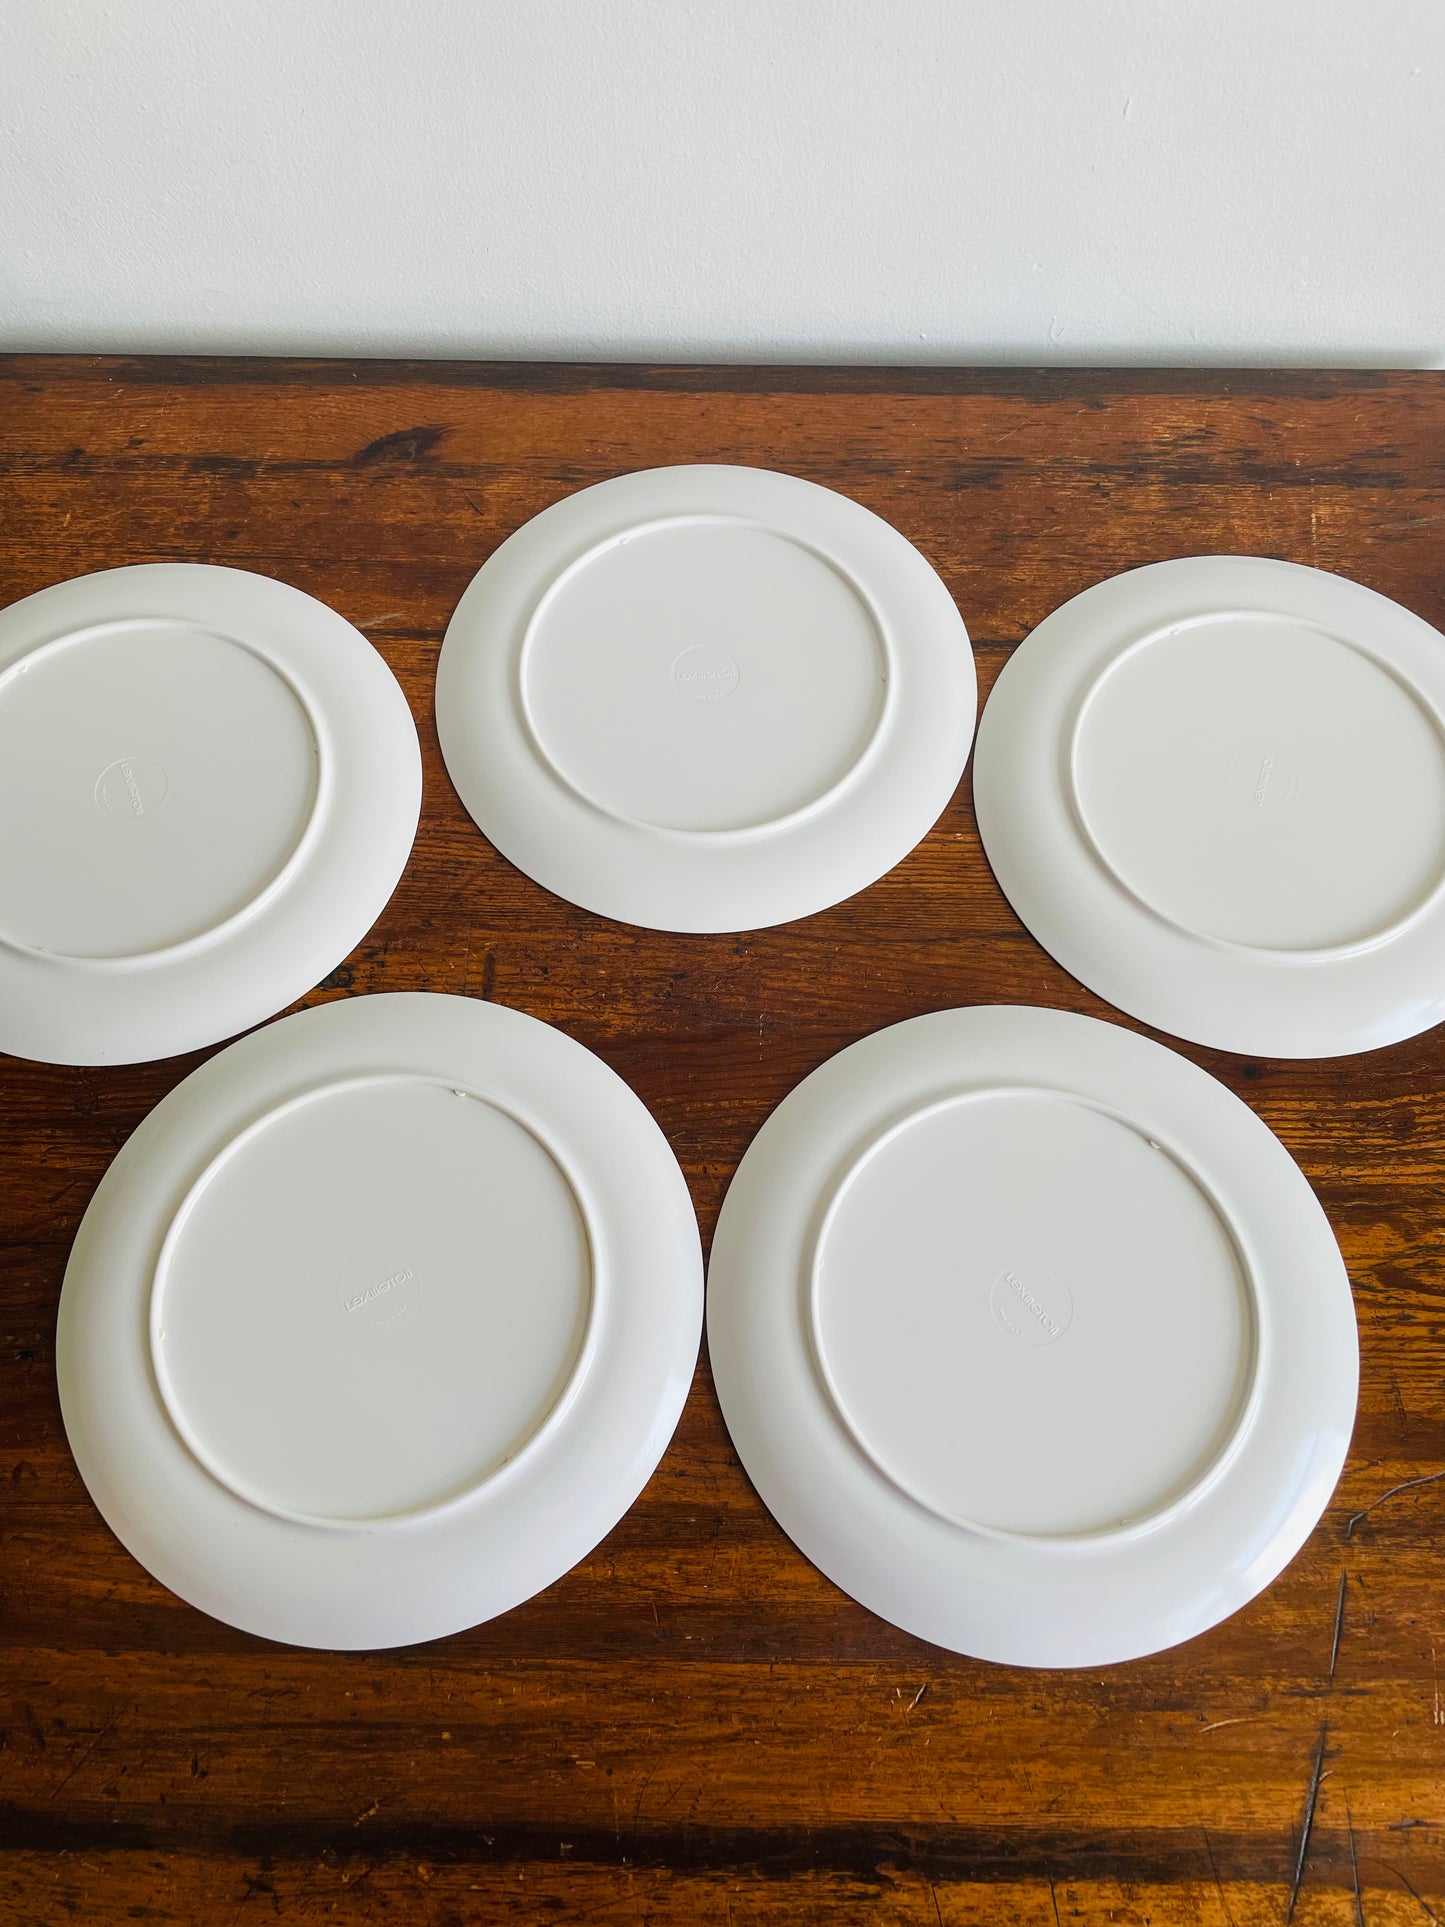 Lexington Melamine Plates with Vegetables Graphic - Set of 5 - Made in USA